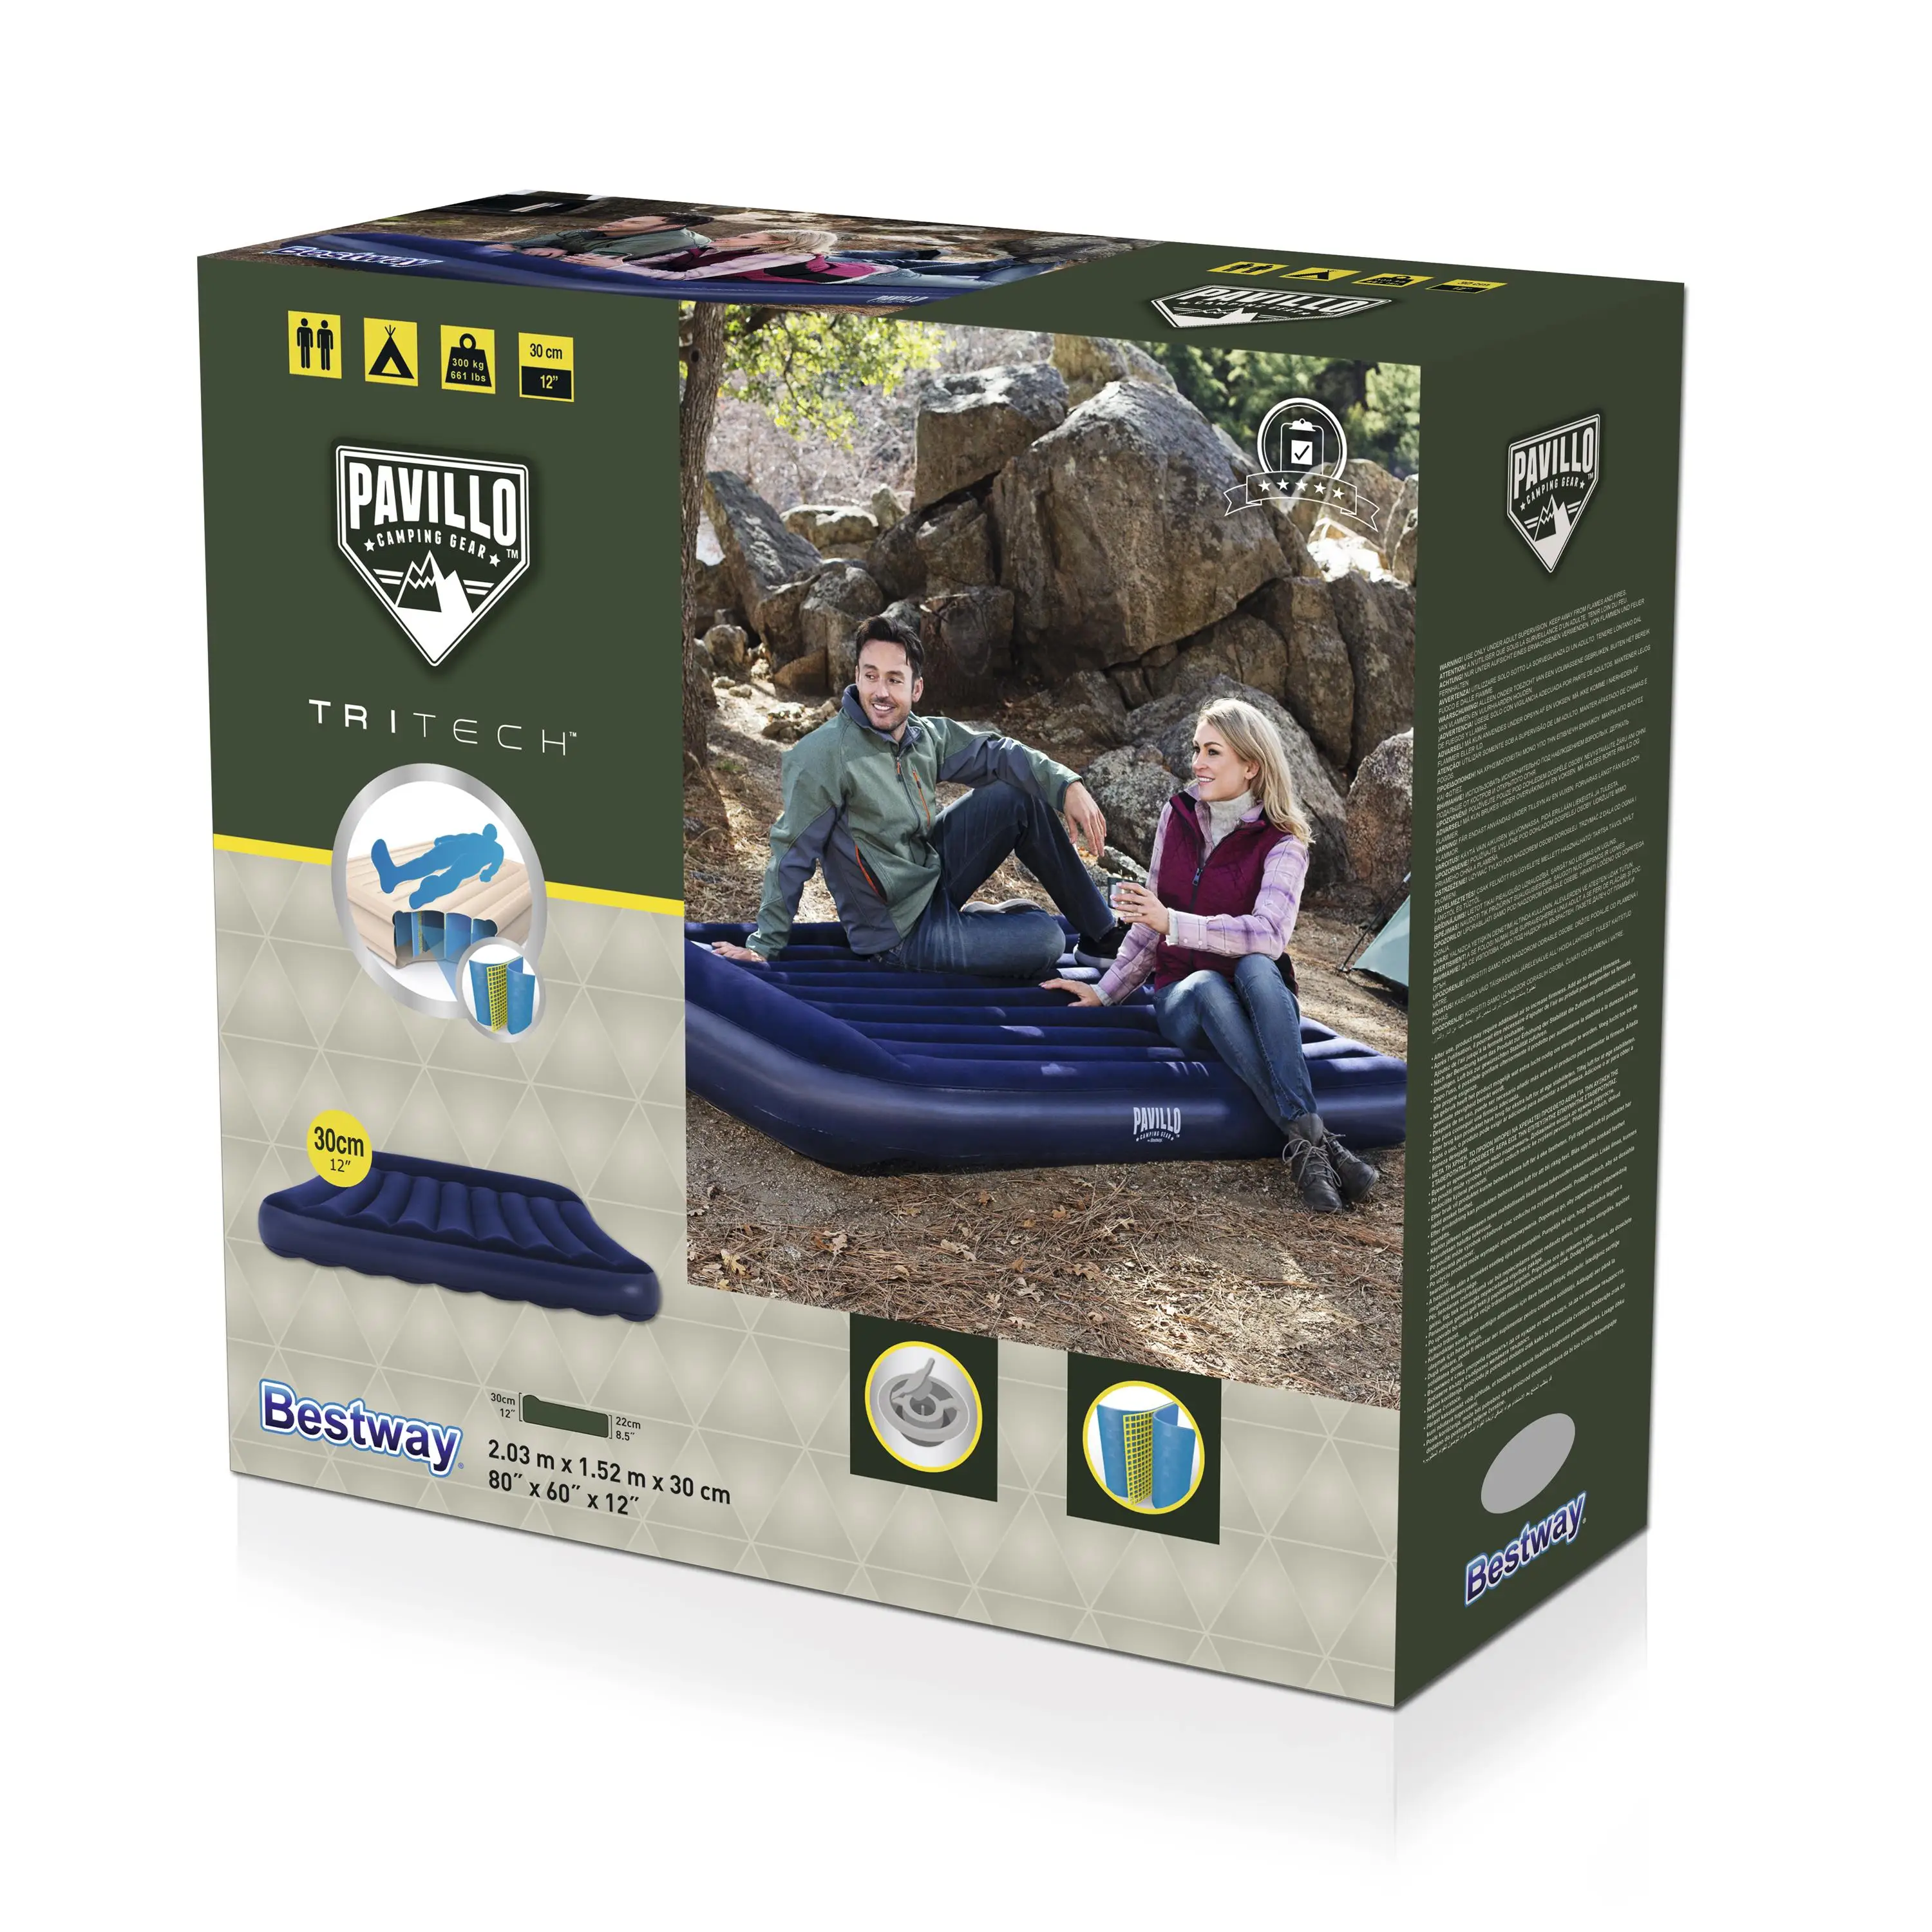 

Bestway 67682 Pavillo 80in x 60in x 12in Tritech Folding 2 Adults Double Queen Inflatable Camping Air Mattress